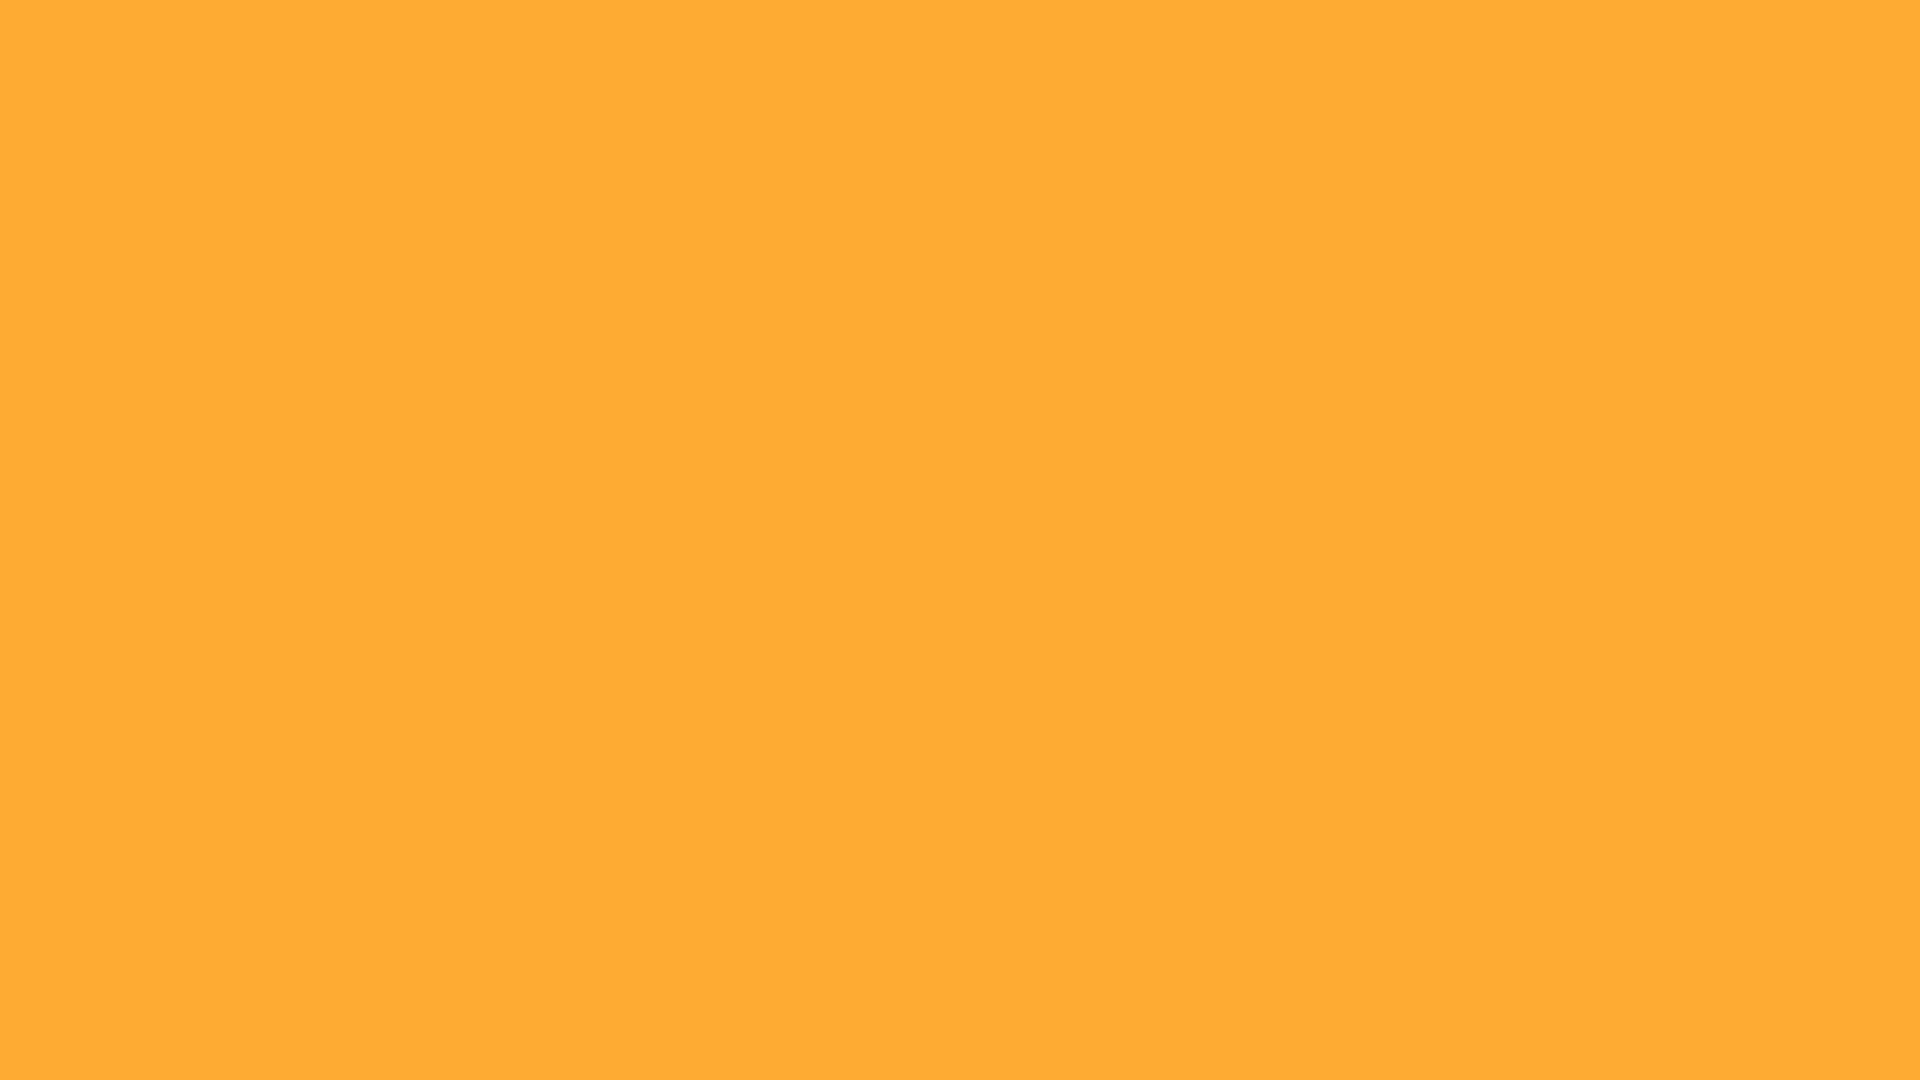 Sunlit Gradient: A Mesmerizing Blend Of Yellow And Orange